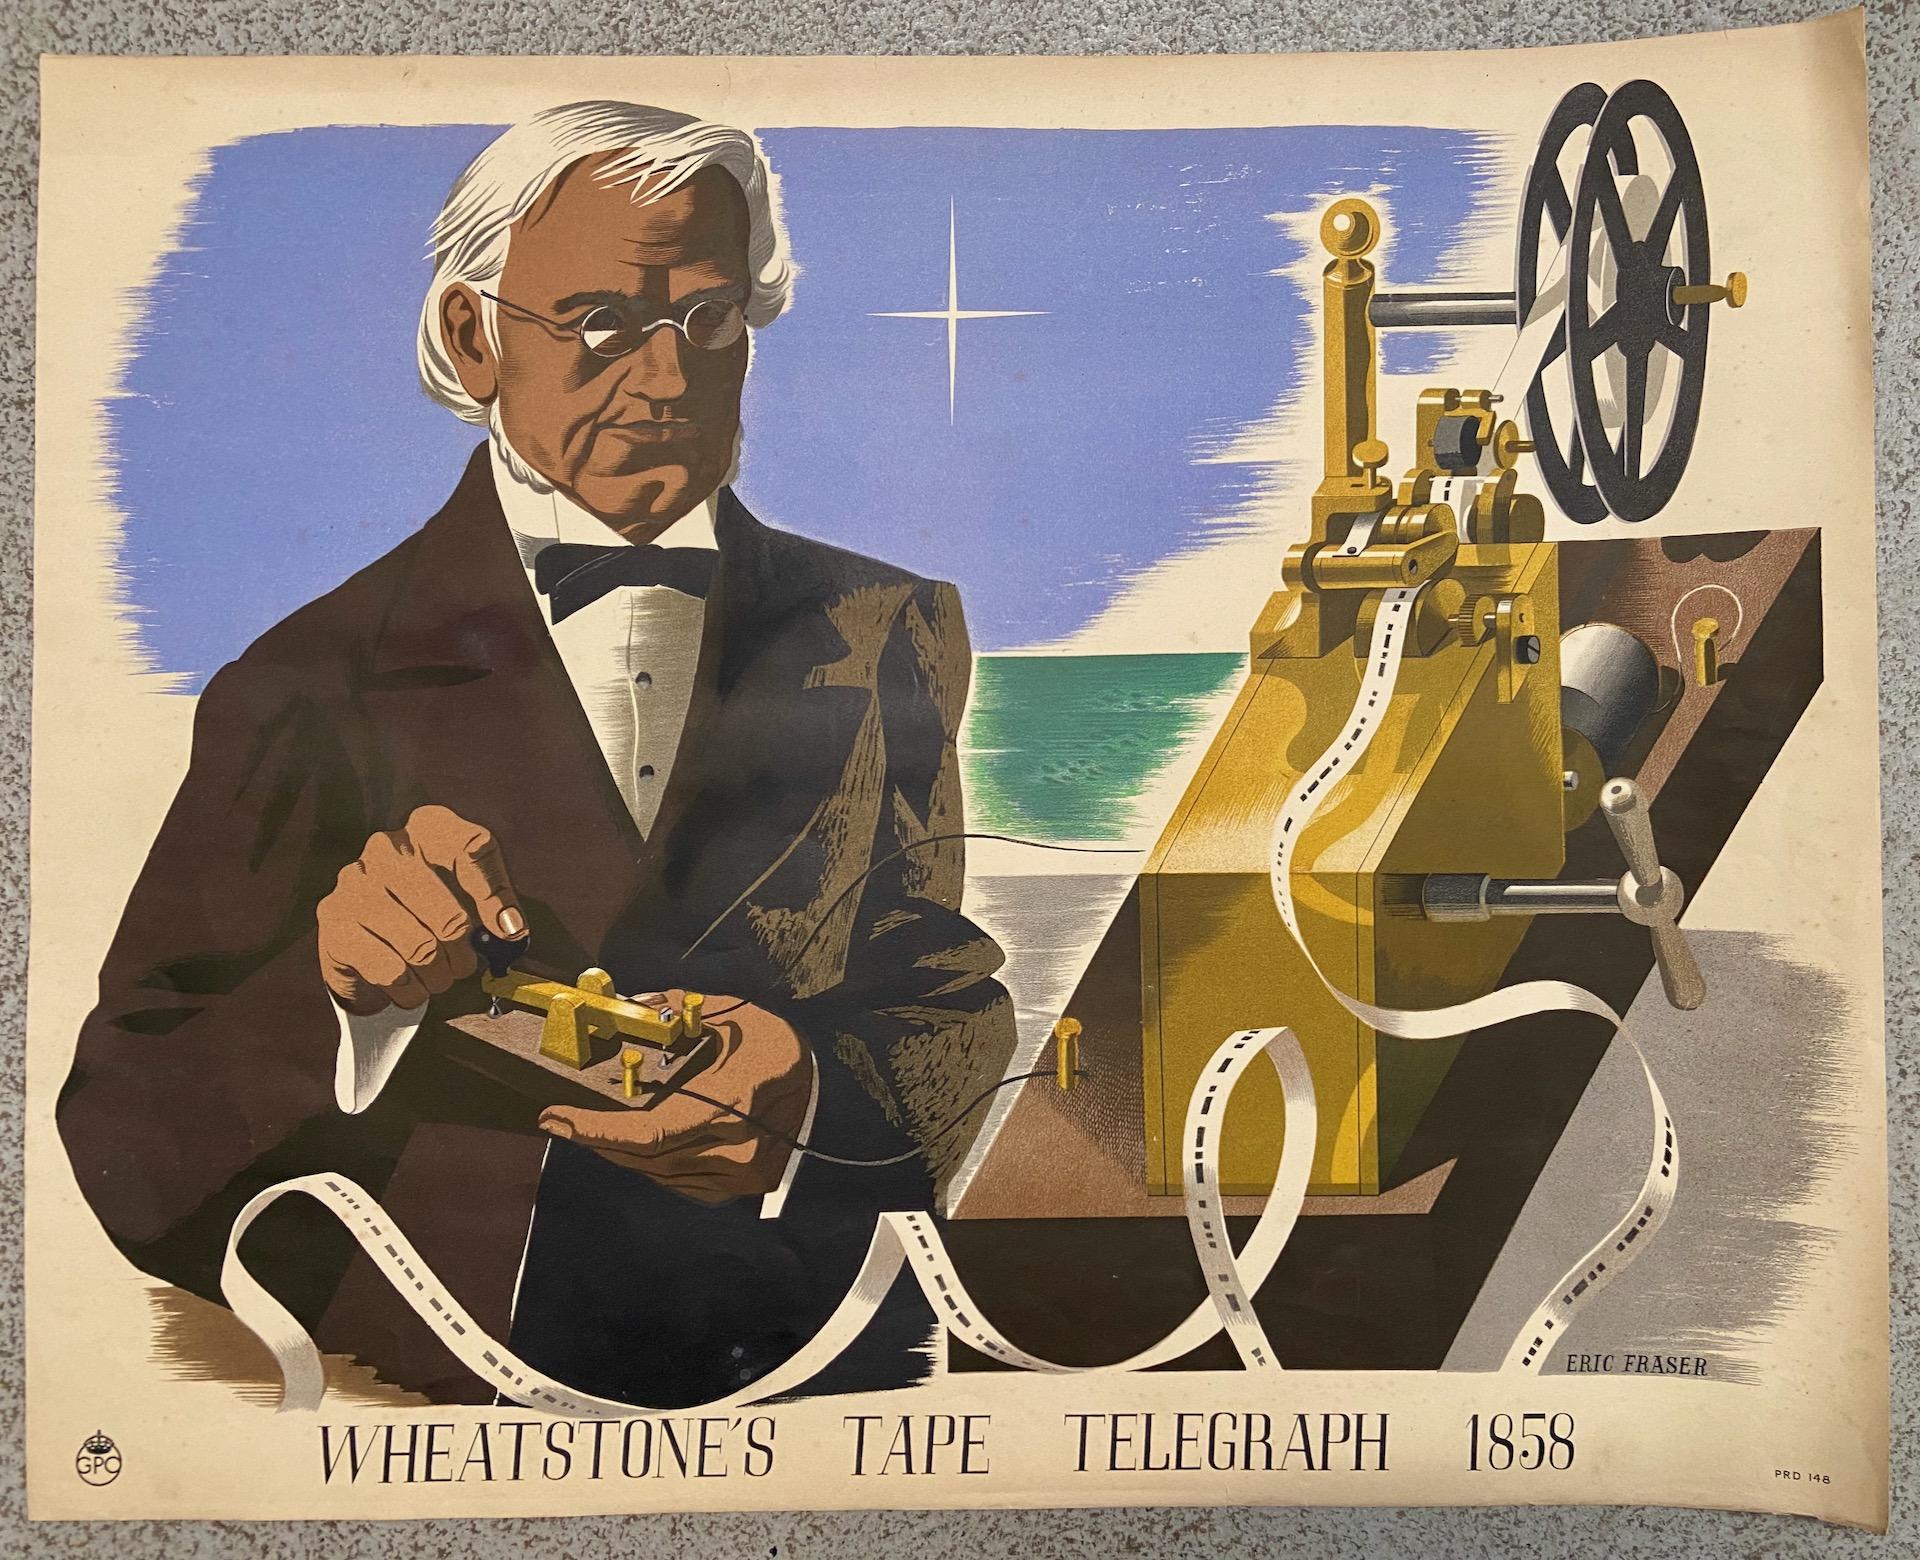 "Wheatstone's Tape Telegraph 1858" original GPO lithograph poster by Eric Fraser For Sale